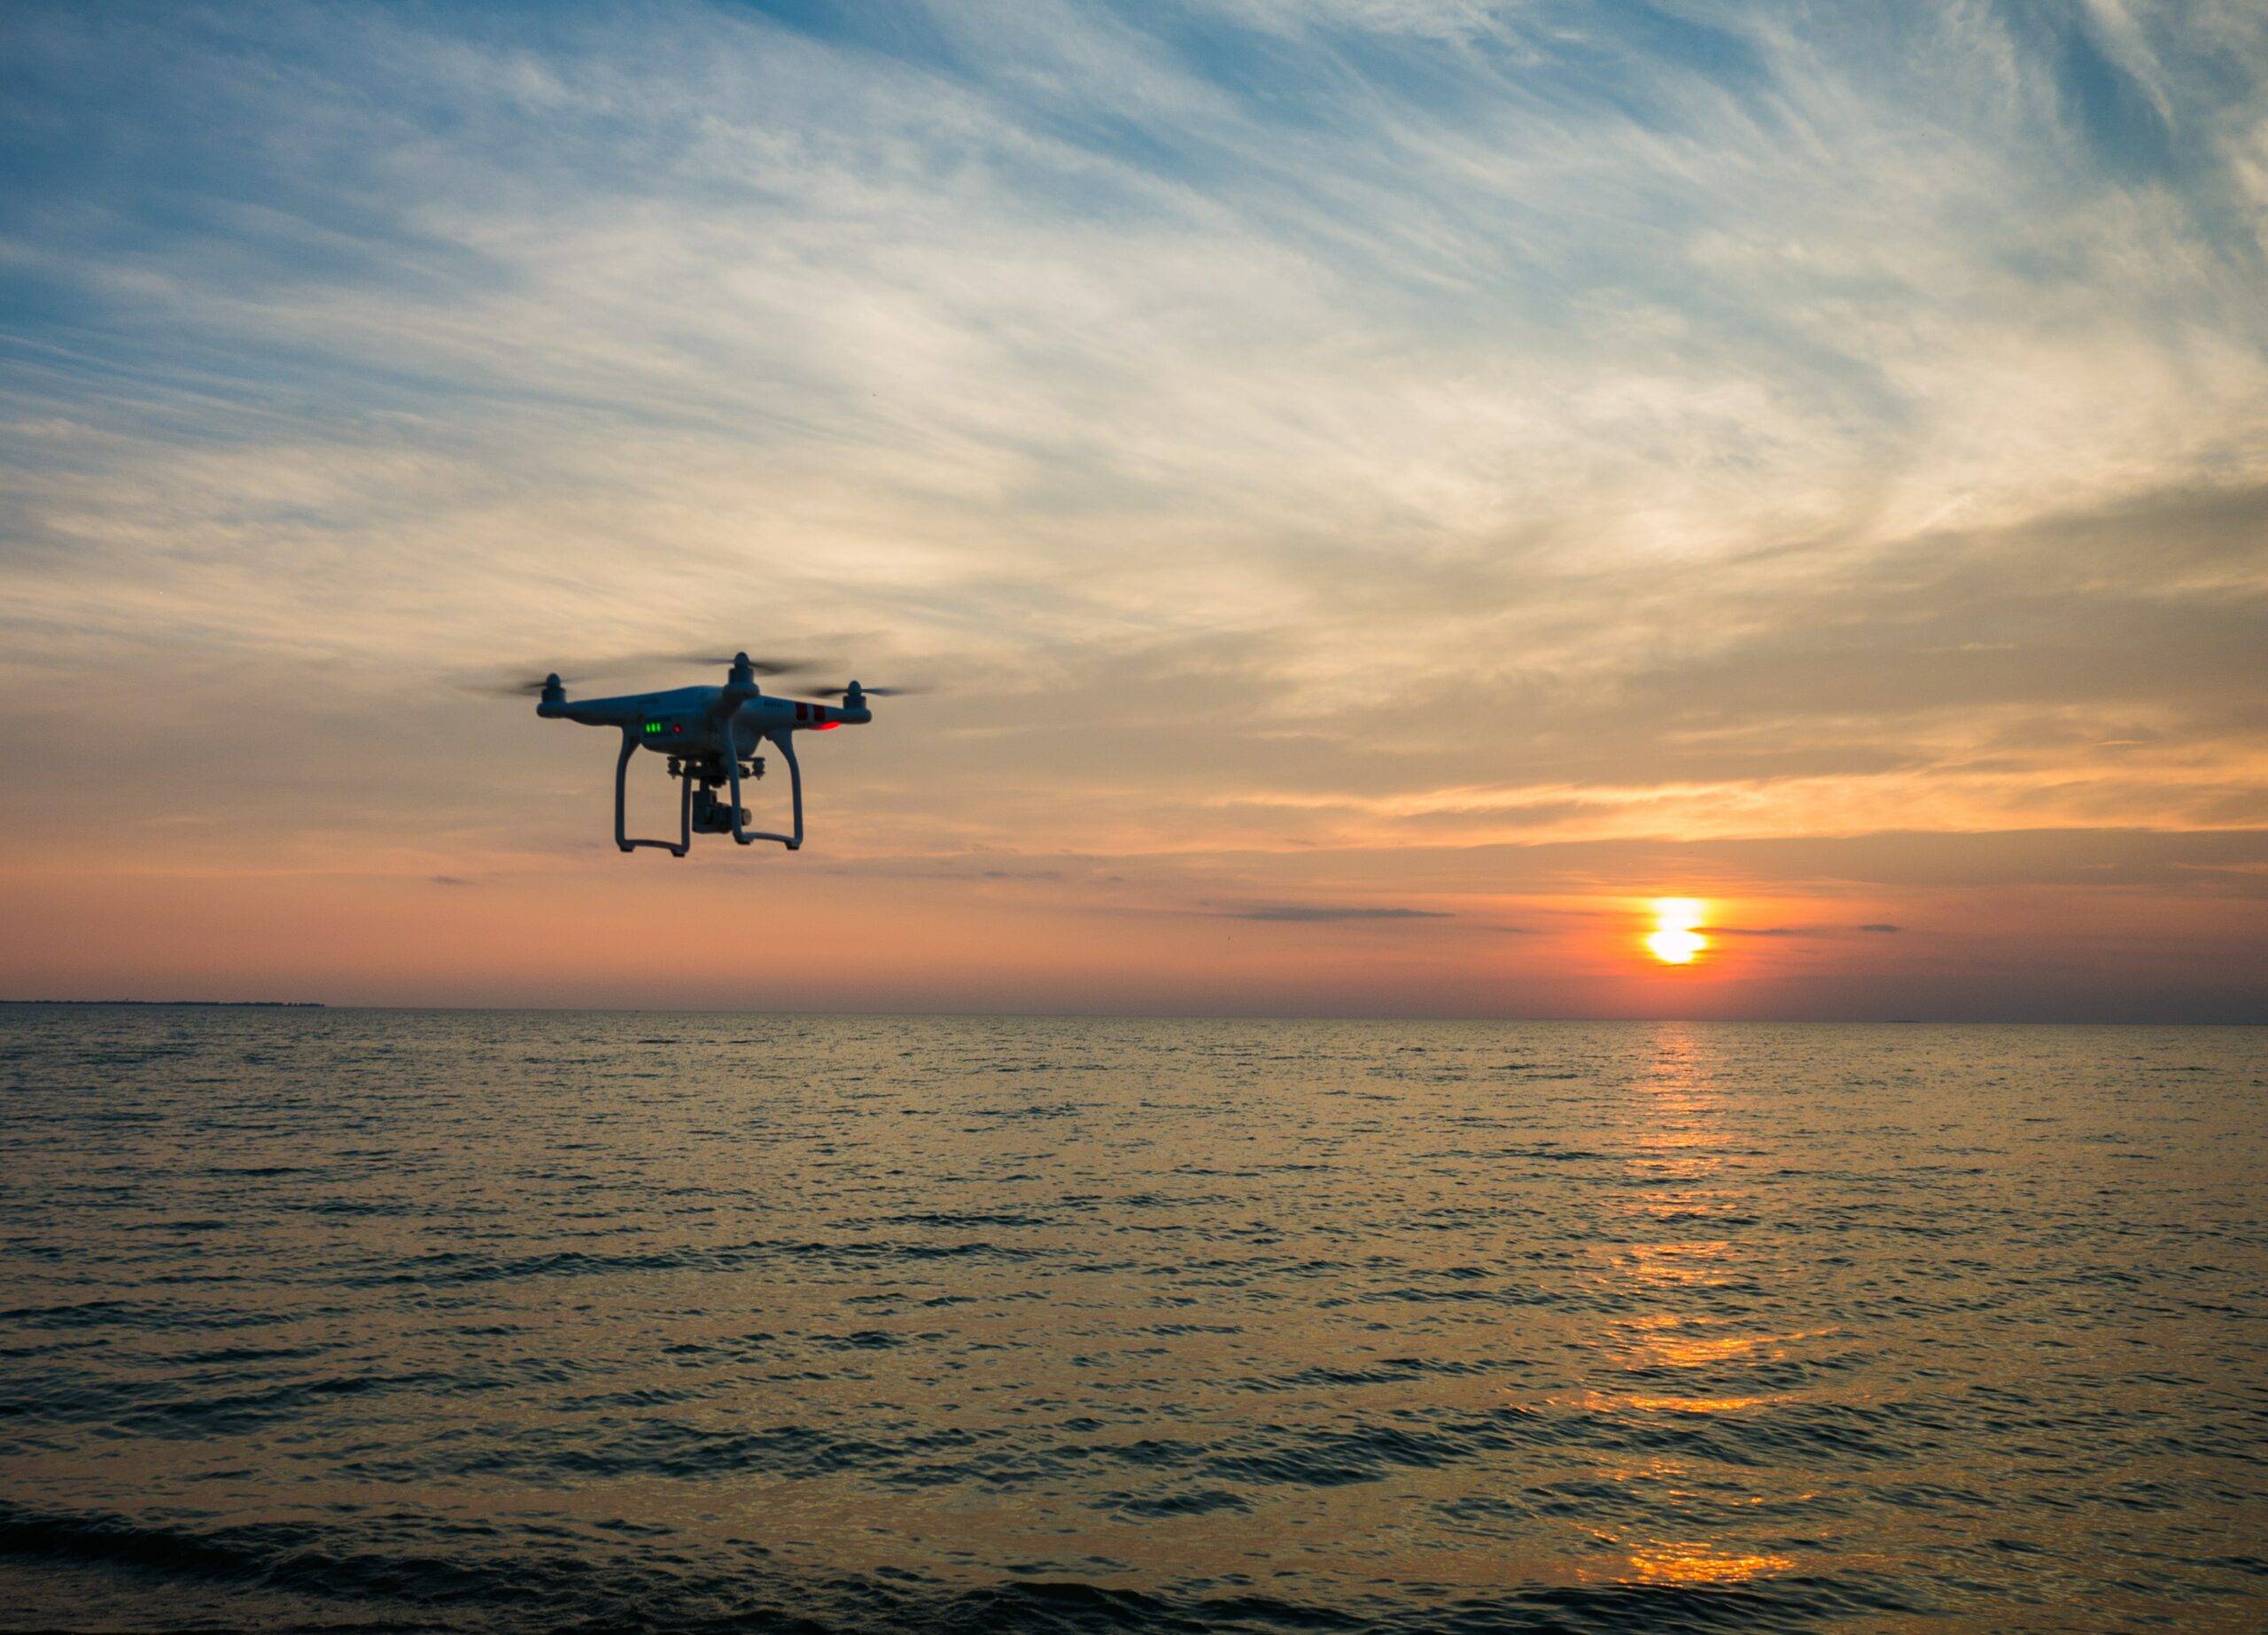 BT trials drone and AI technology at Southampton port